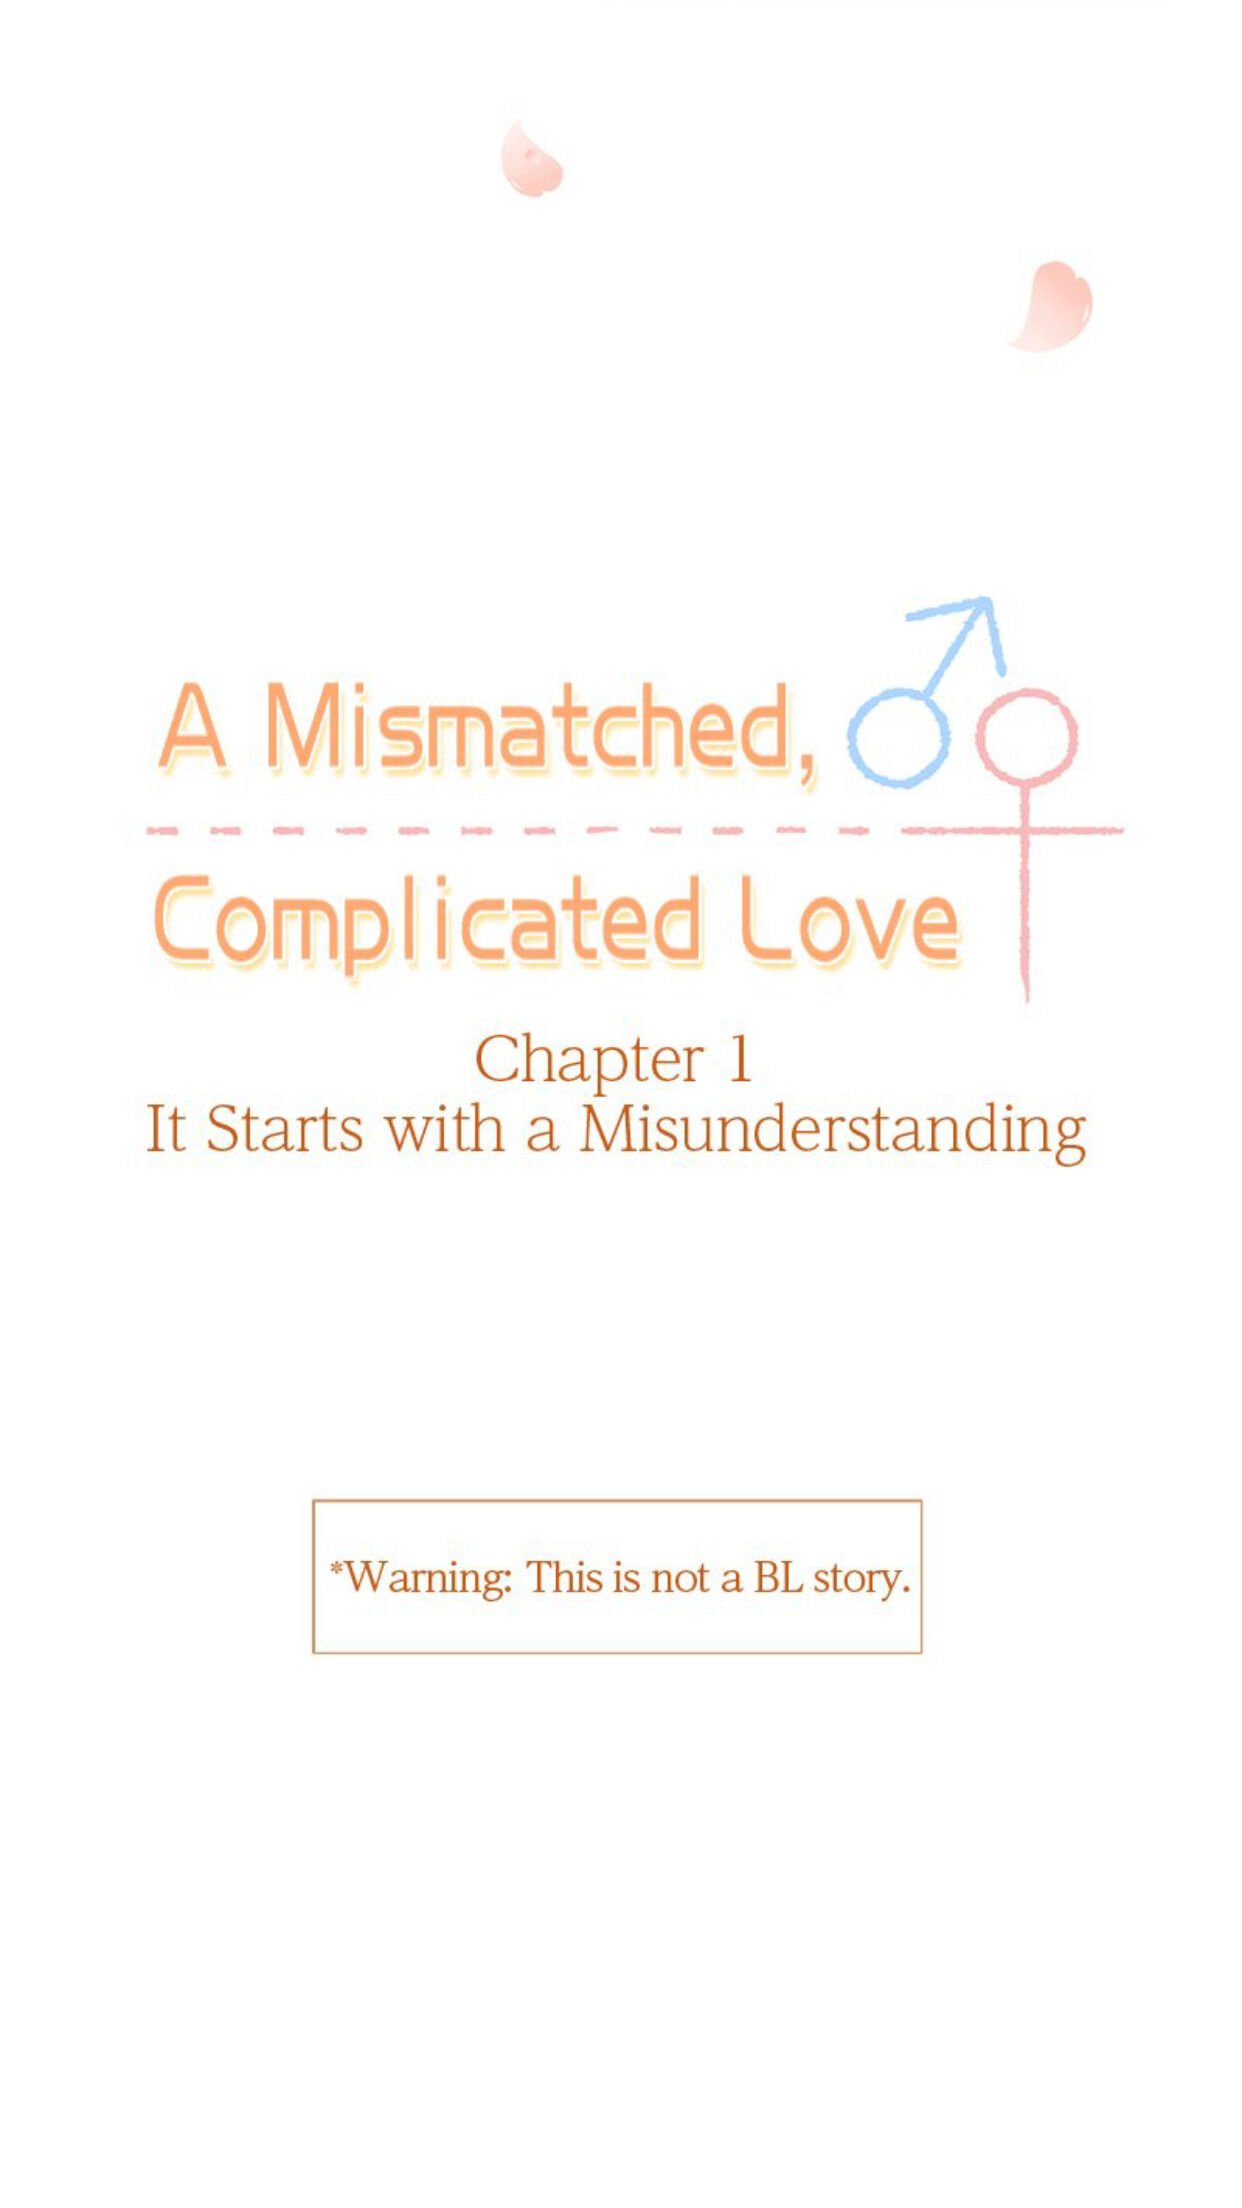 A Mismatched Complicated Love chapter 1